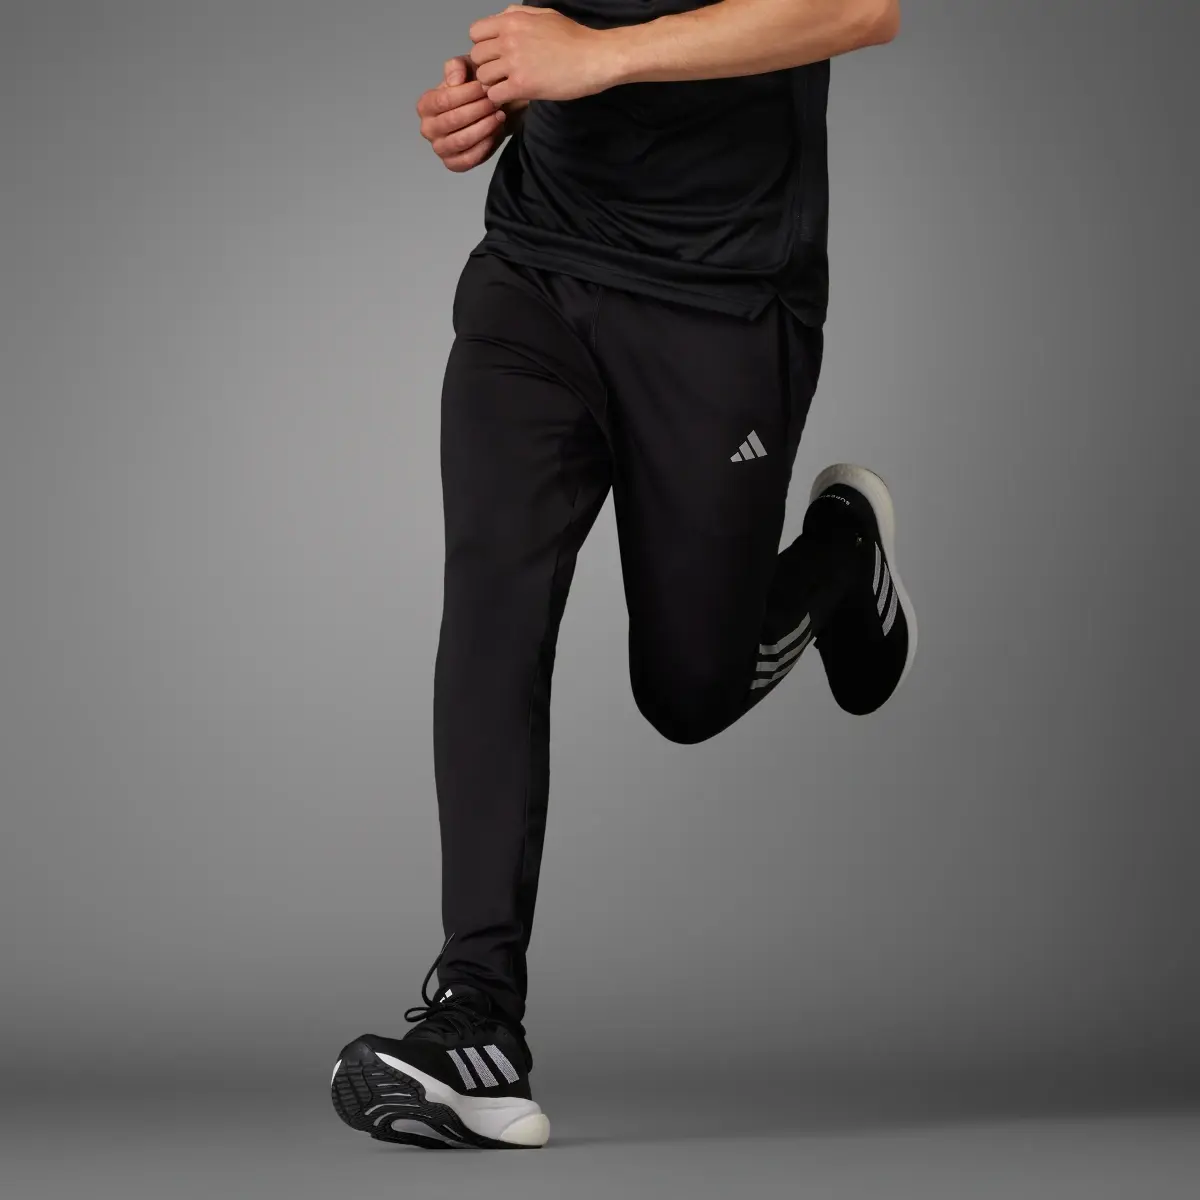 Adidas Own the Run Astro Knit Pants. 1